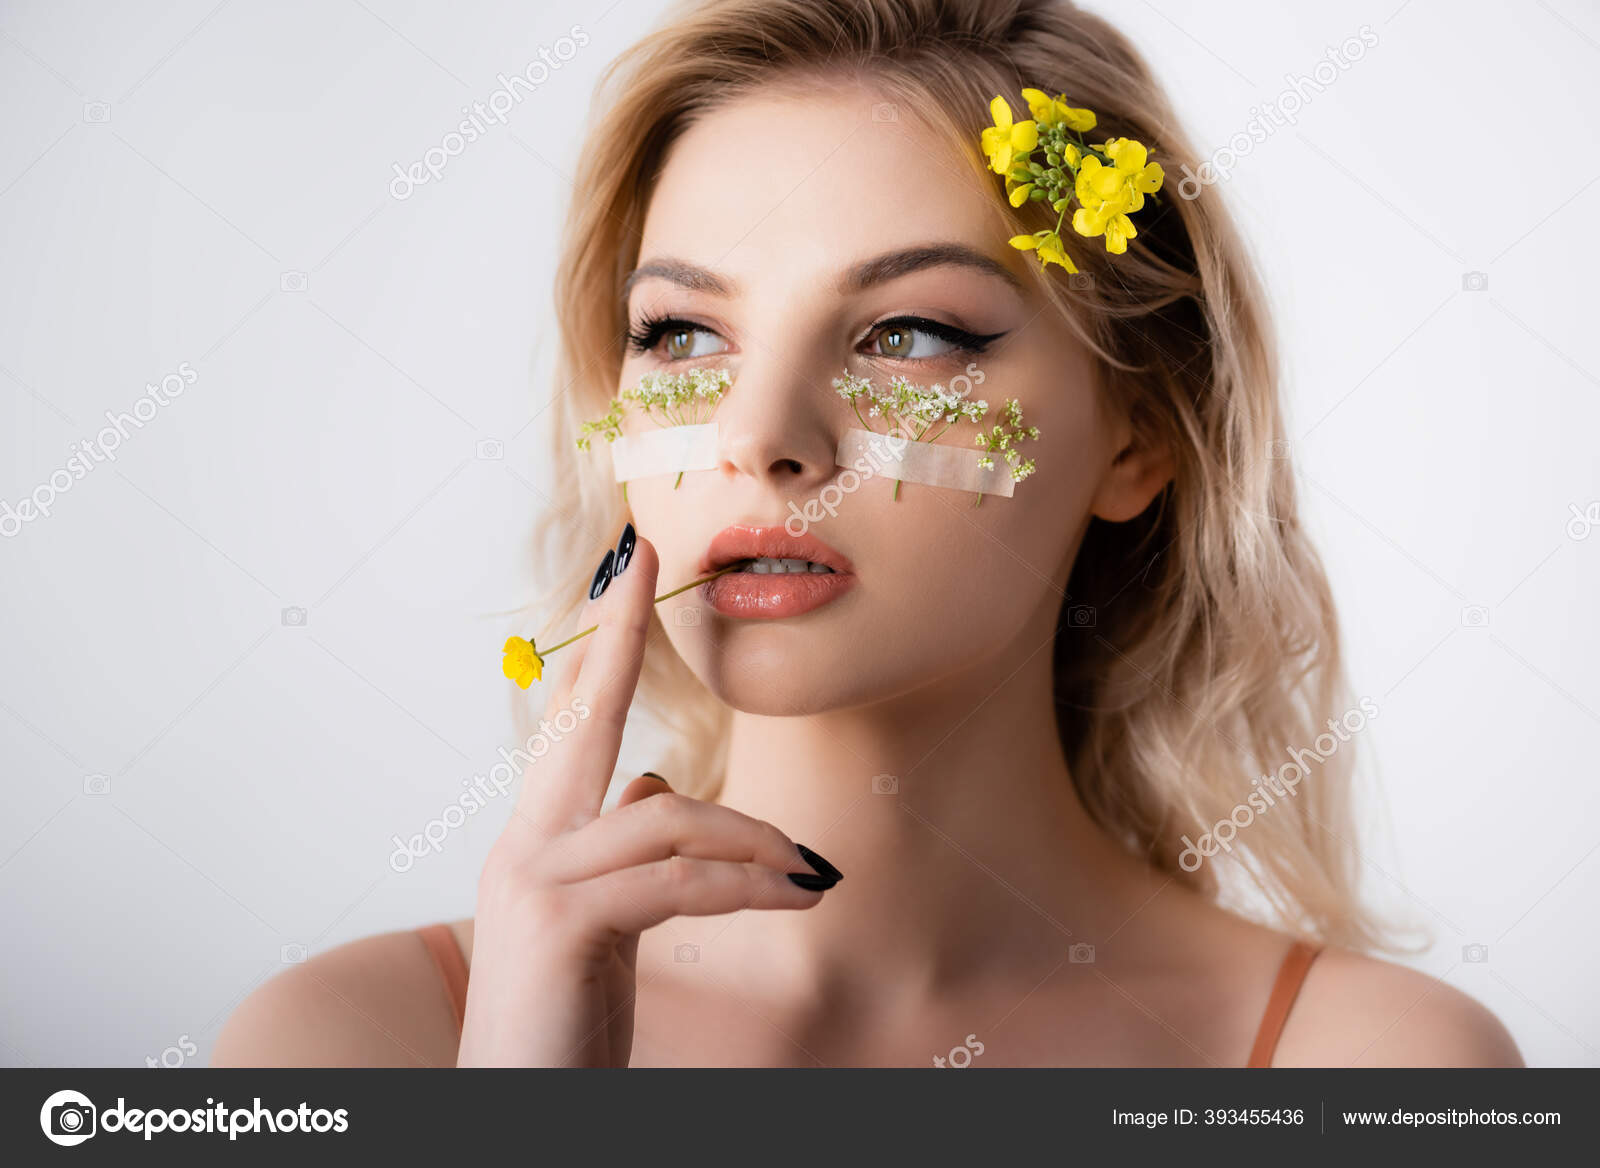 Blonde woman with wildflowers in her hair - wide 10